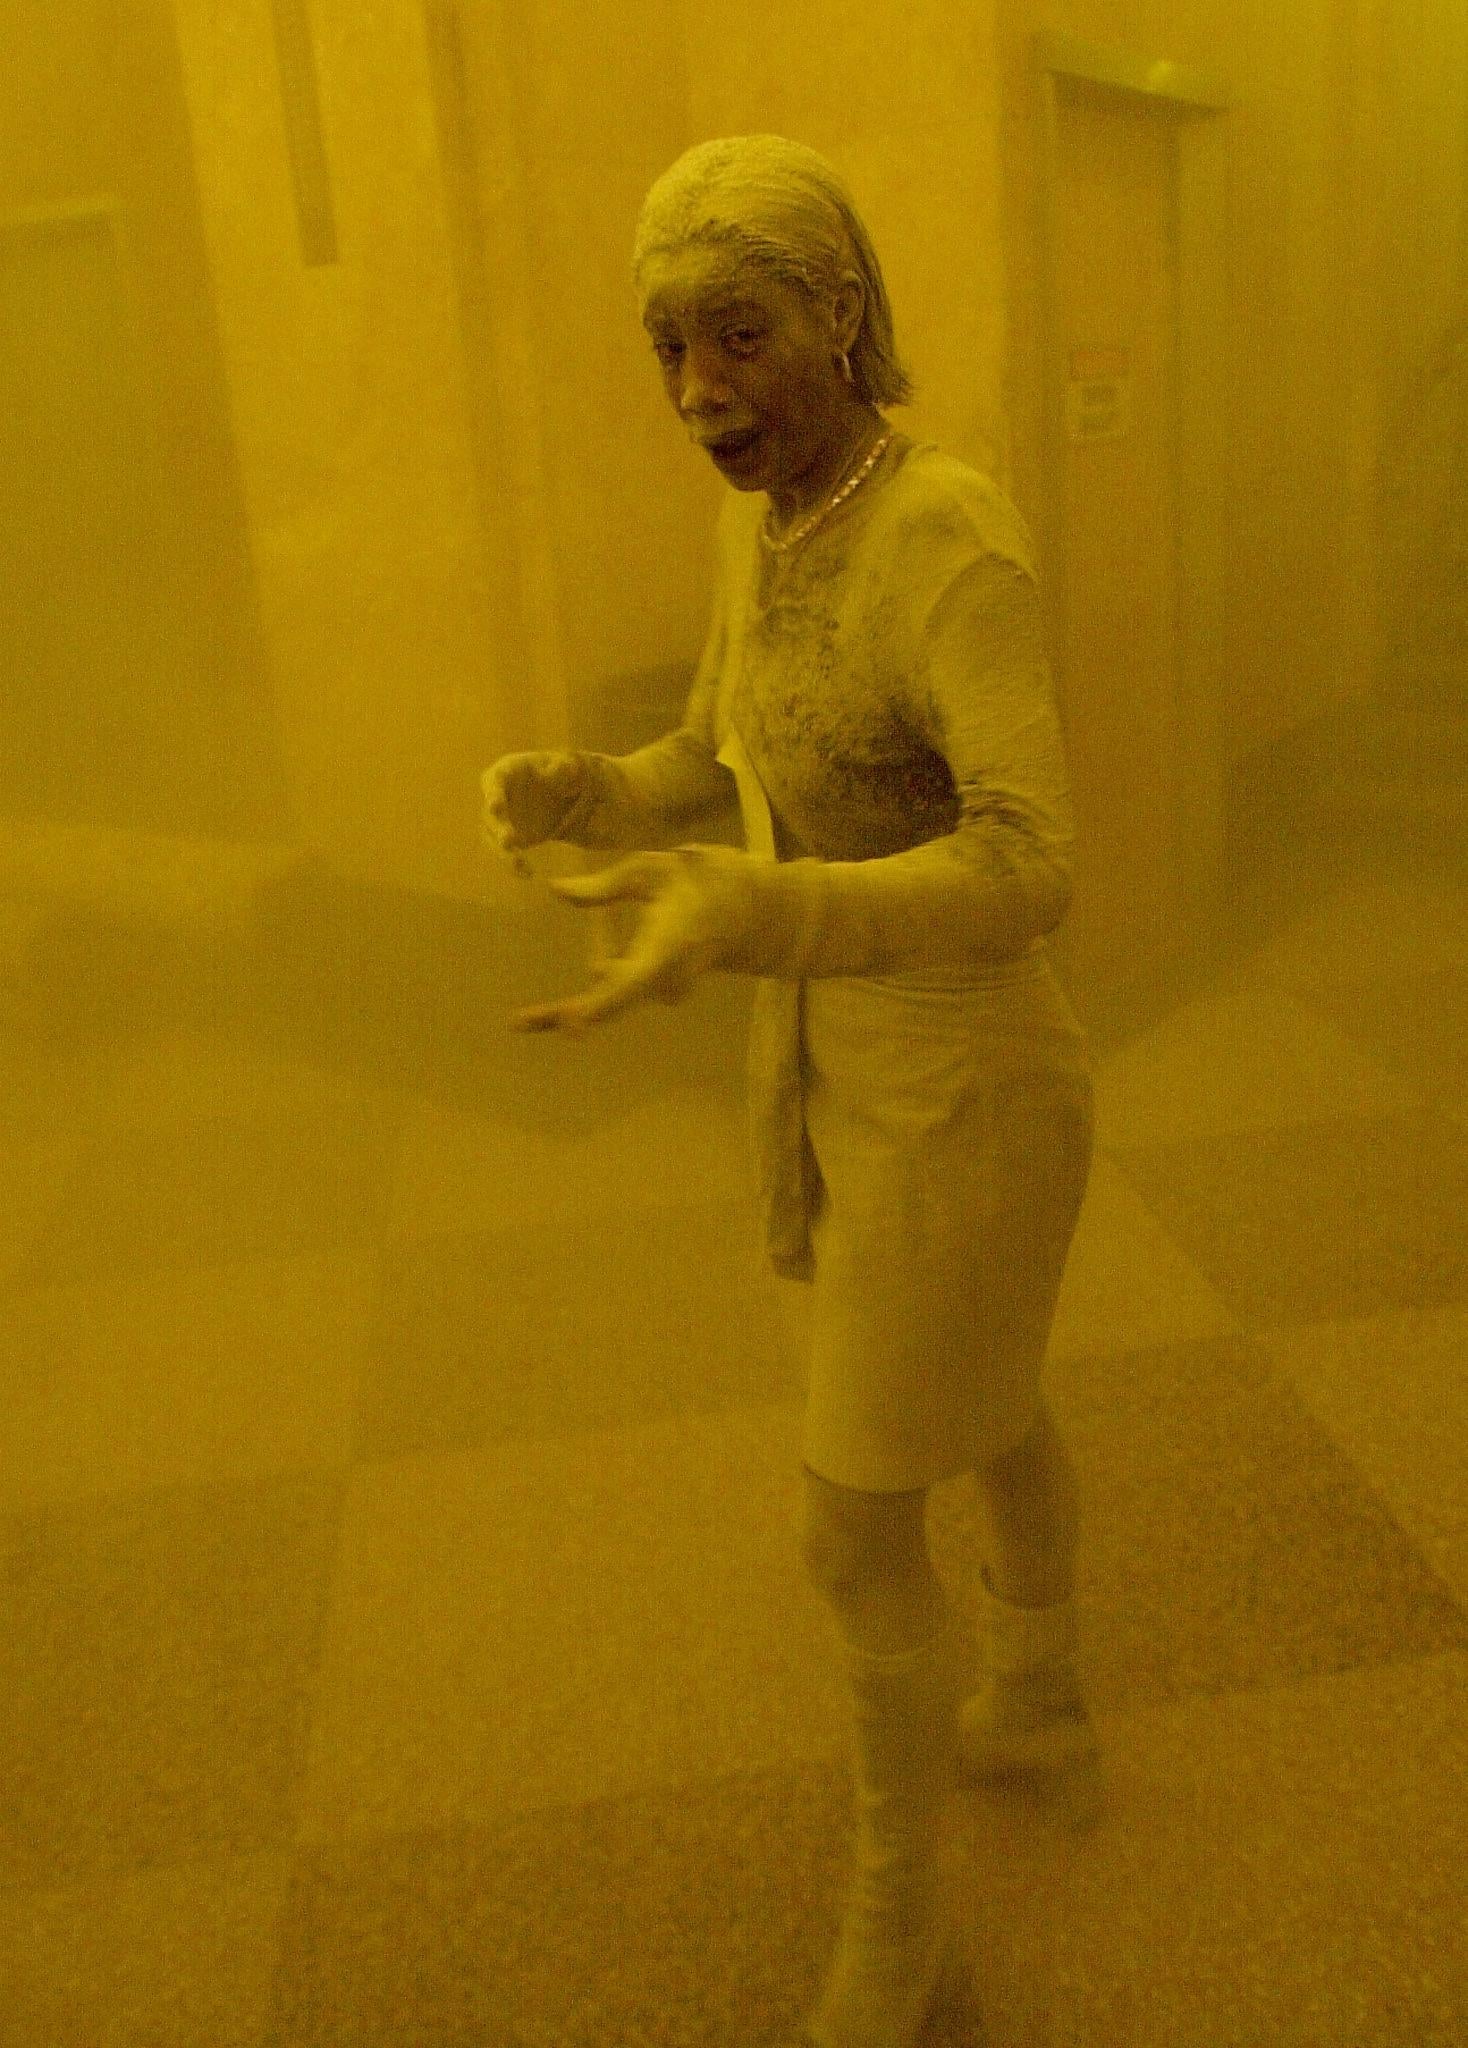 Marcy Borders stands covered in dust as she takes refuge in an office building following the collapse of the Twin Towers